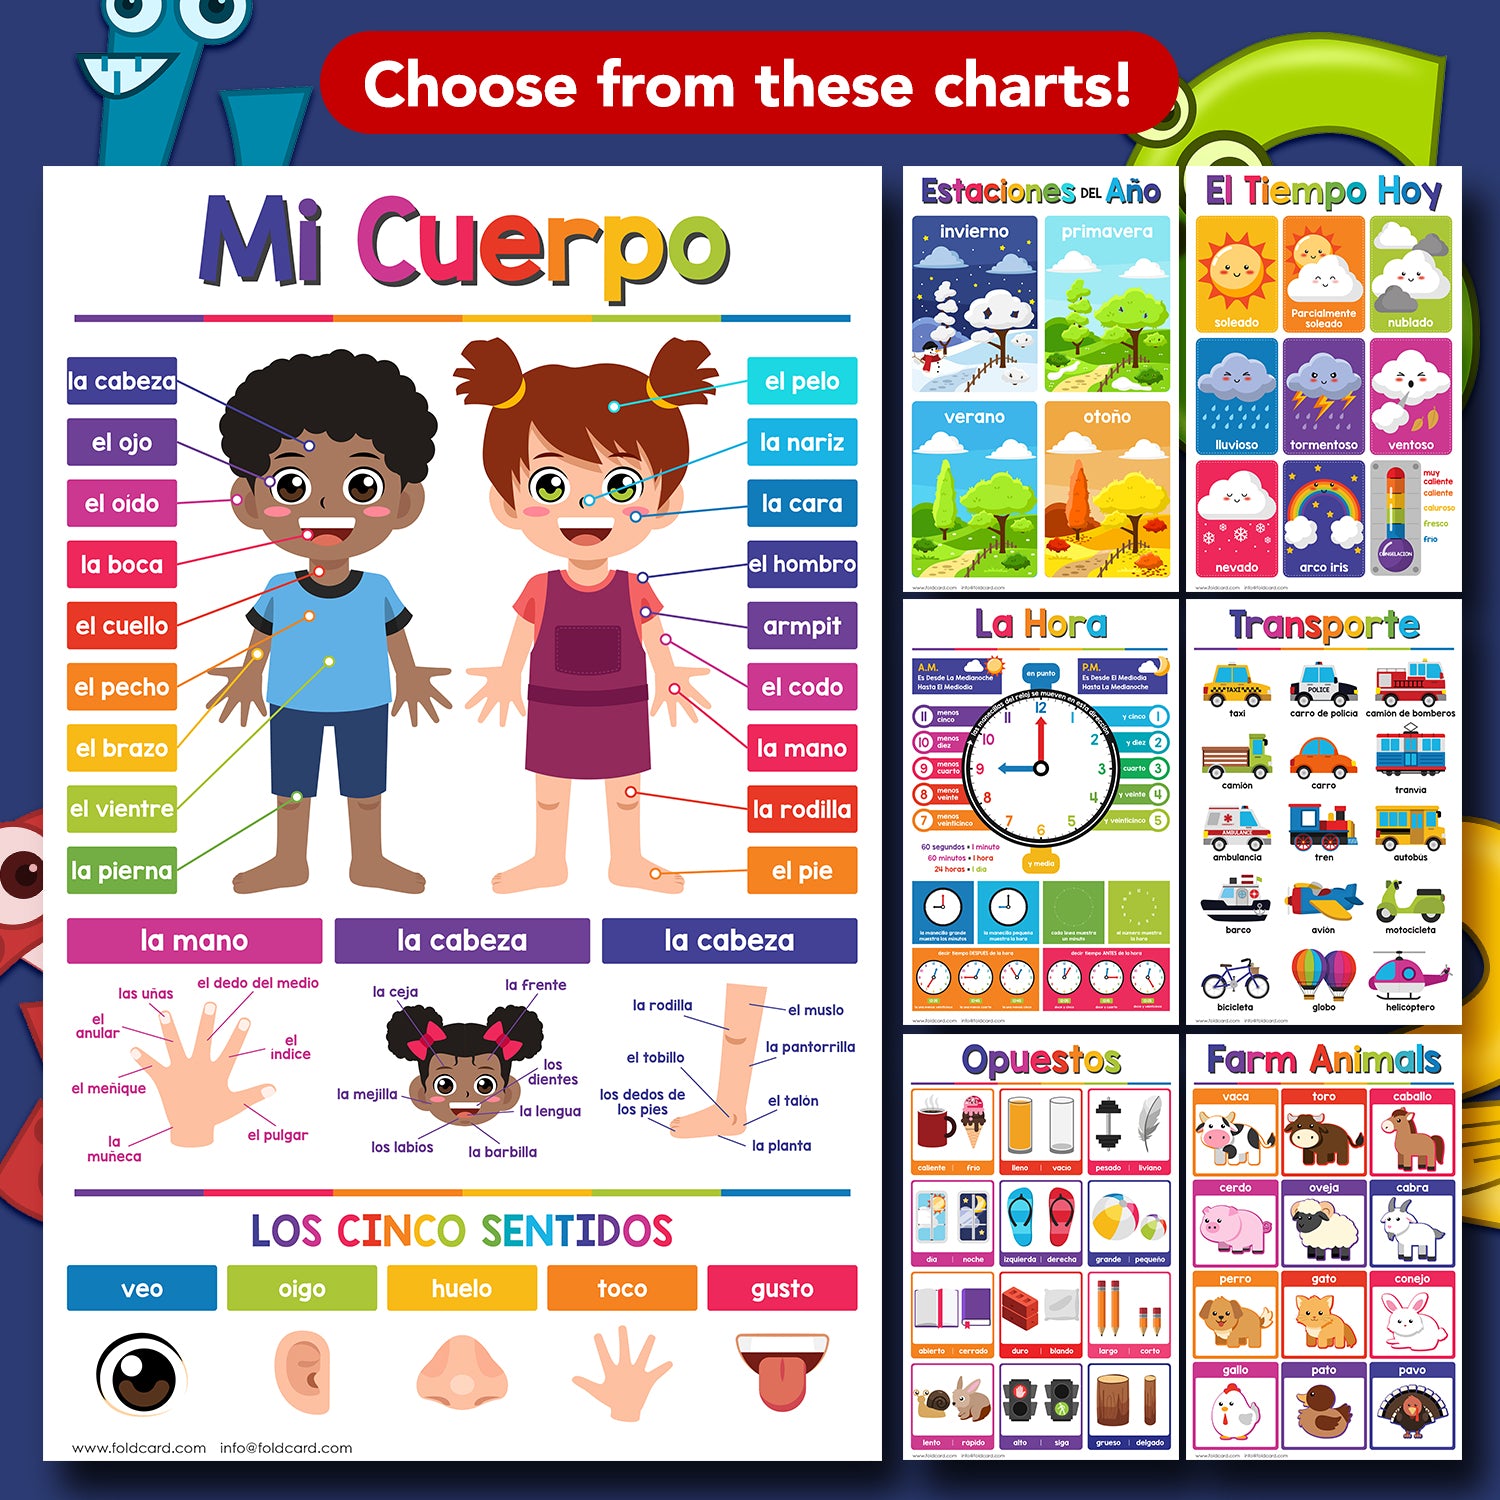 Spanish Numbers 1-100 Chart for Kids - Bright Educational Visual | 11" x 17" | 5-Pack